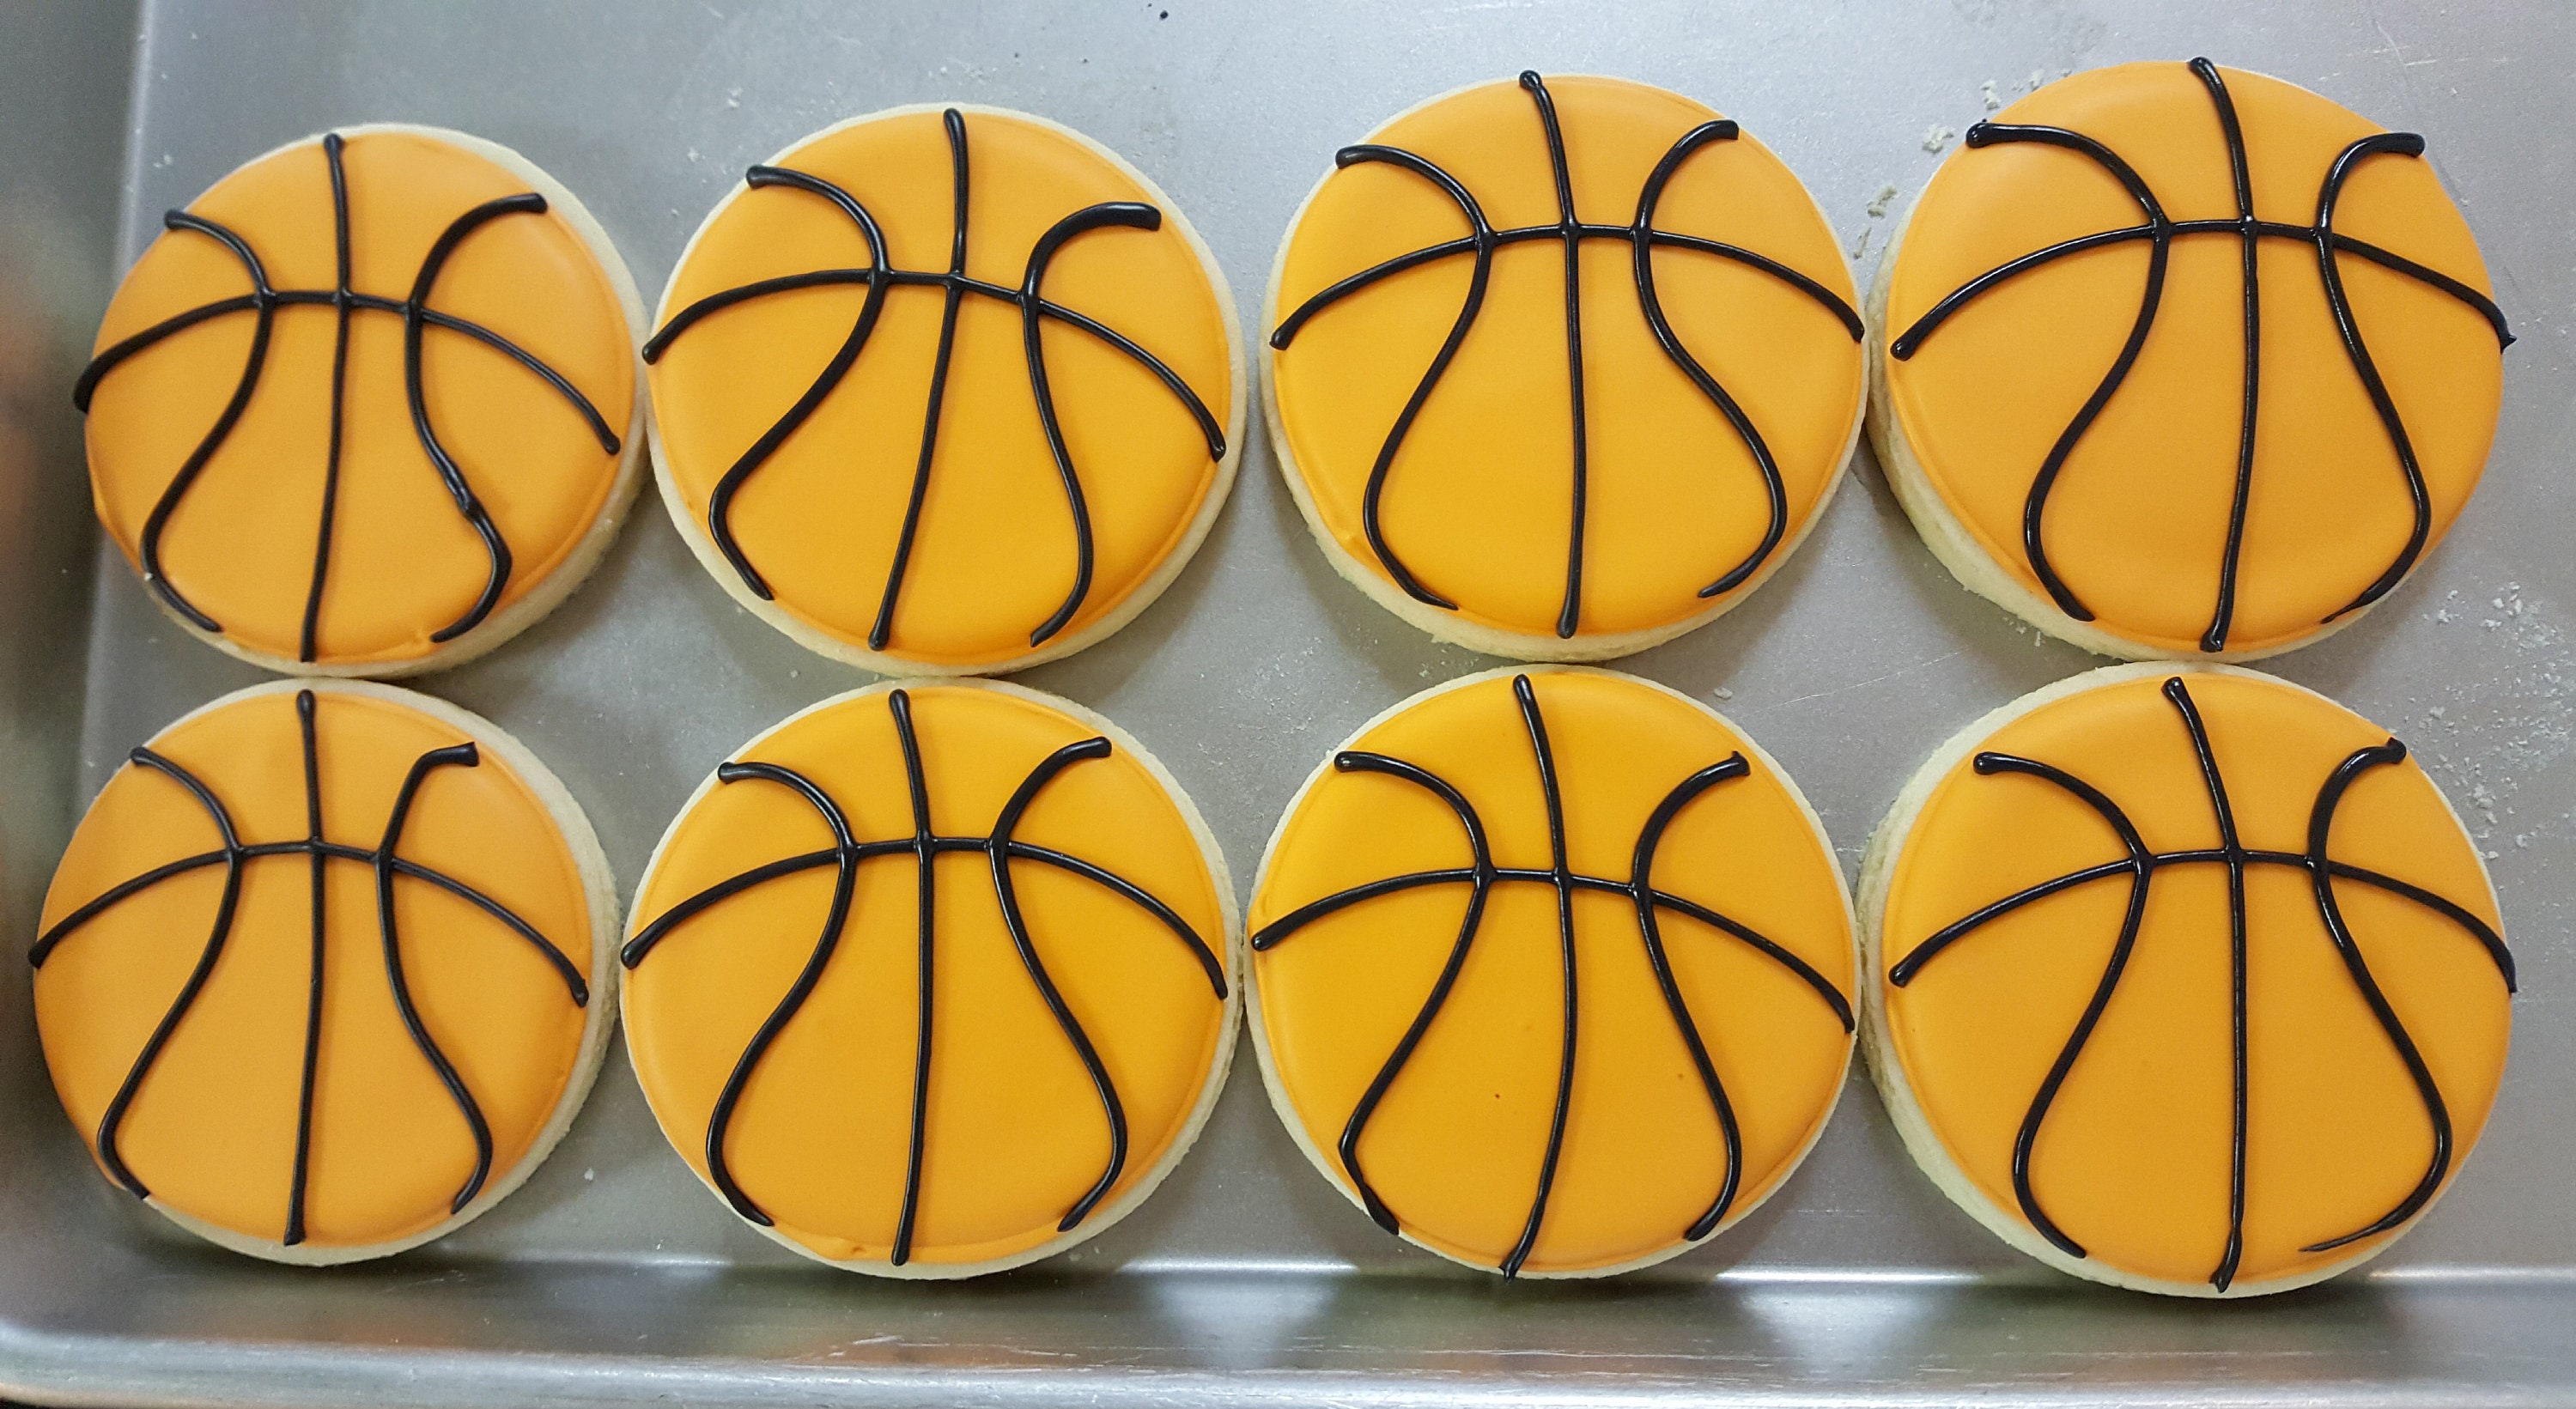 Basketball Cookies · Decorative Cookies · Food Decoration on Cut Out + Keep